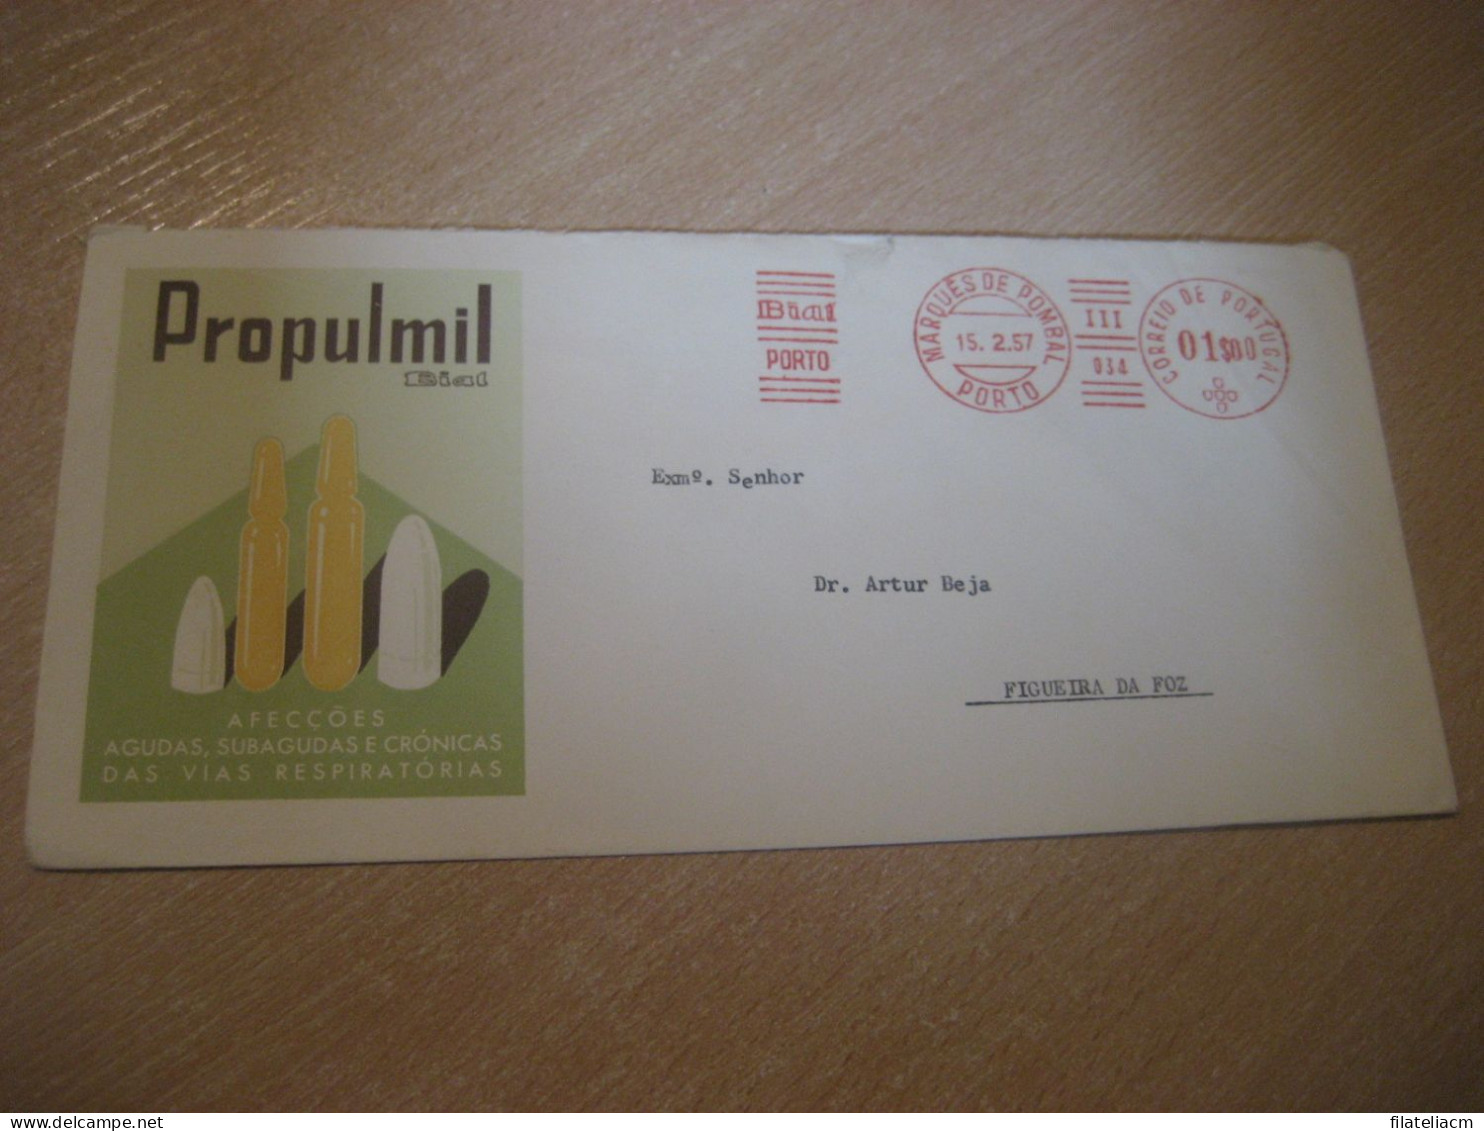 PORTO 1957 To Figueira Da Foz Bial Propulmil Pharmacy Health Chemical Meter Mail Cancel Cover PORTUGAL - Lettres & Documents